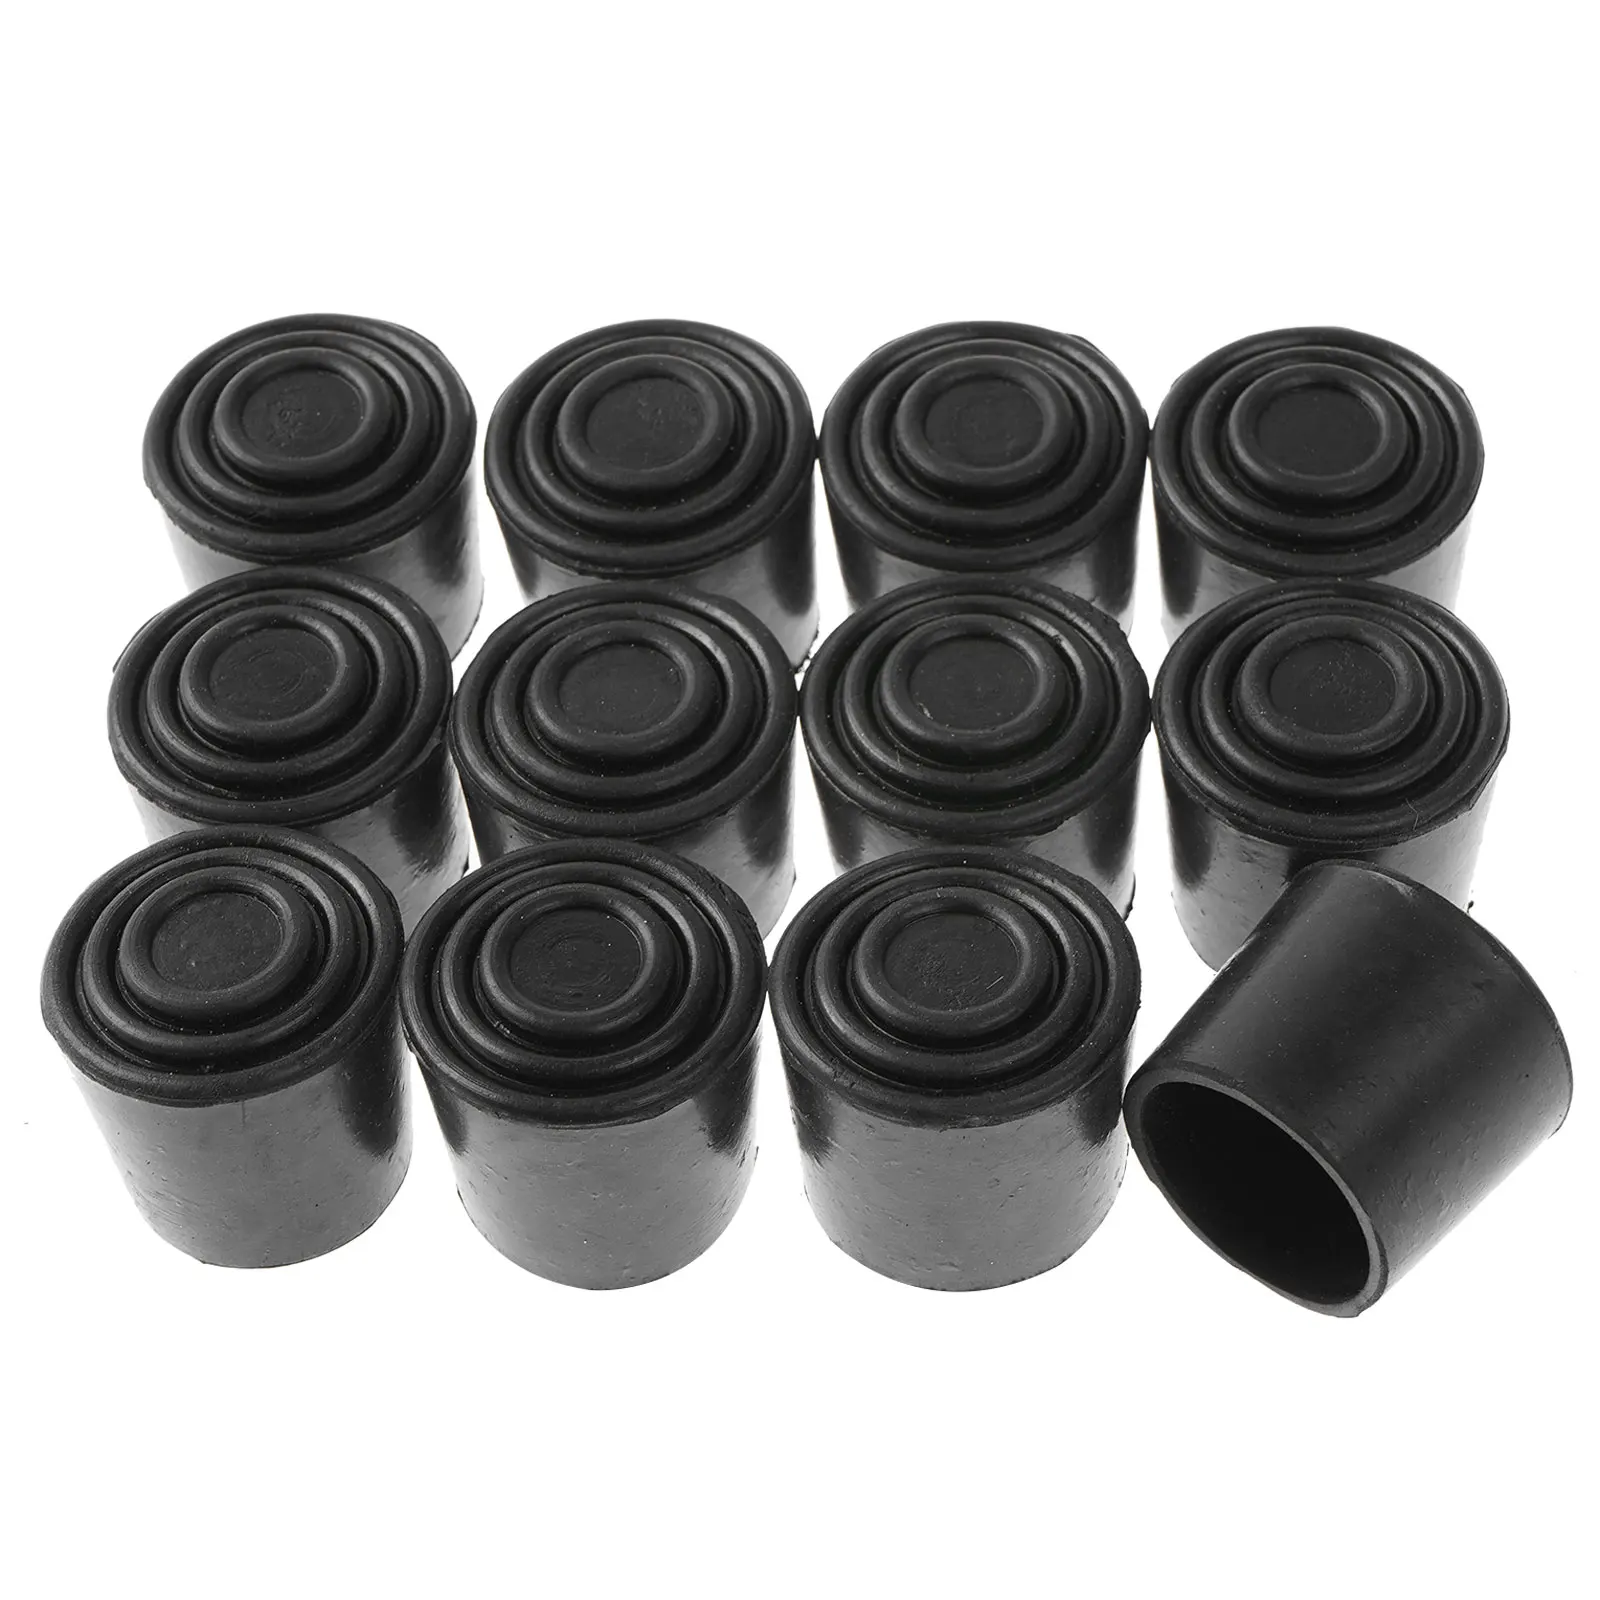 12 Furniture Feet Cups Hardware Floor Protect Rubber Covers Non Slip Round Leg Tips Plugs Office Home Table Chair Legs Ends Caps